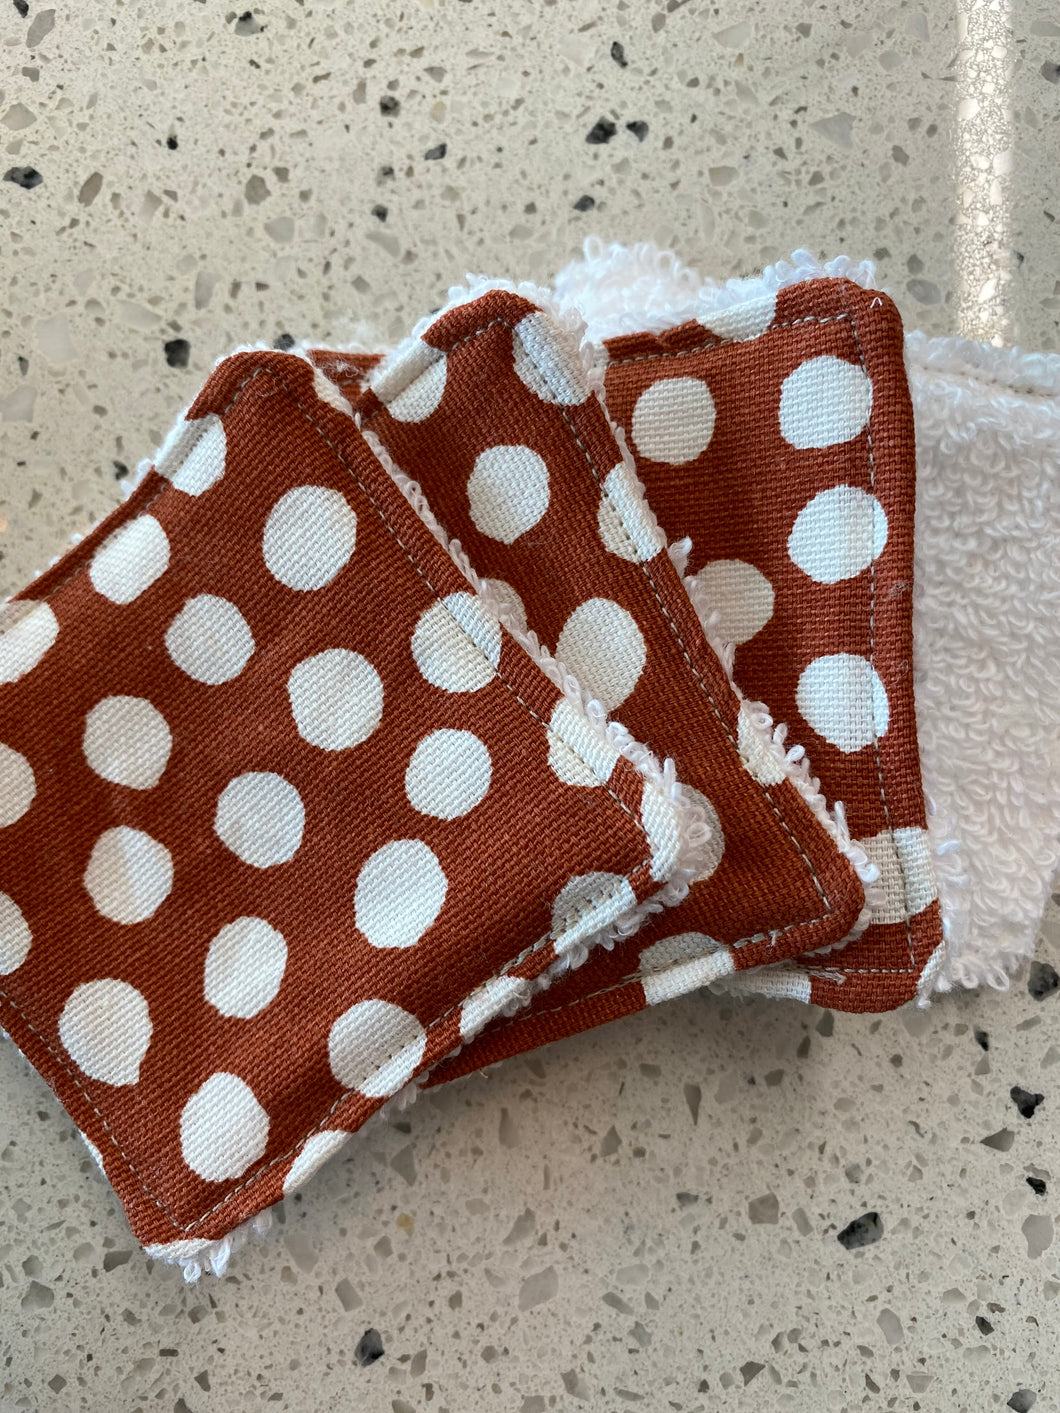 Reusable Makeup Pads (100% cotton) Available in 4 Prints